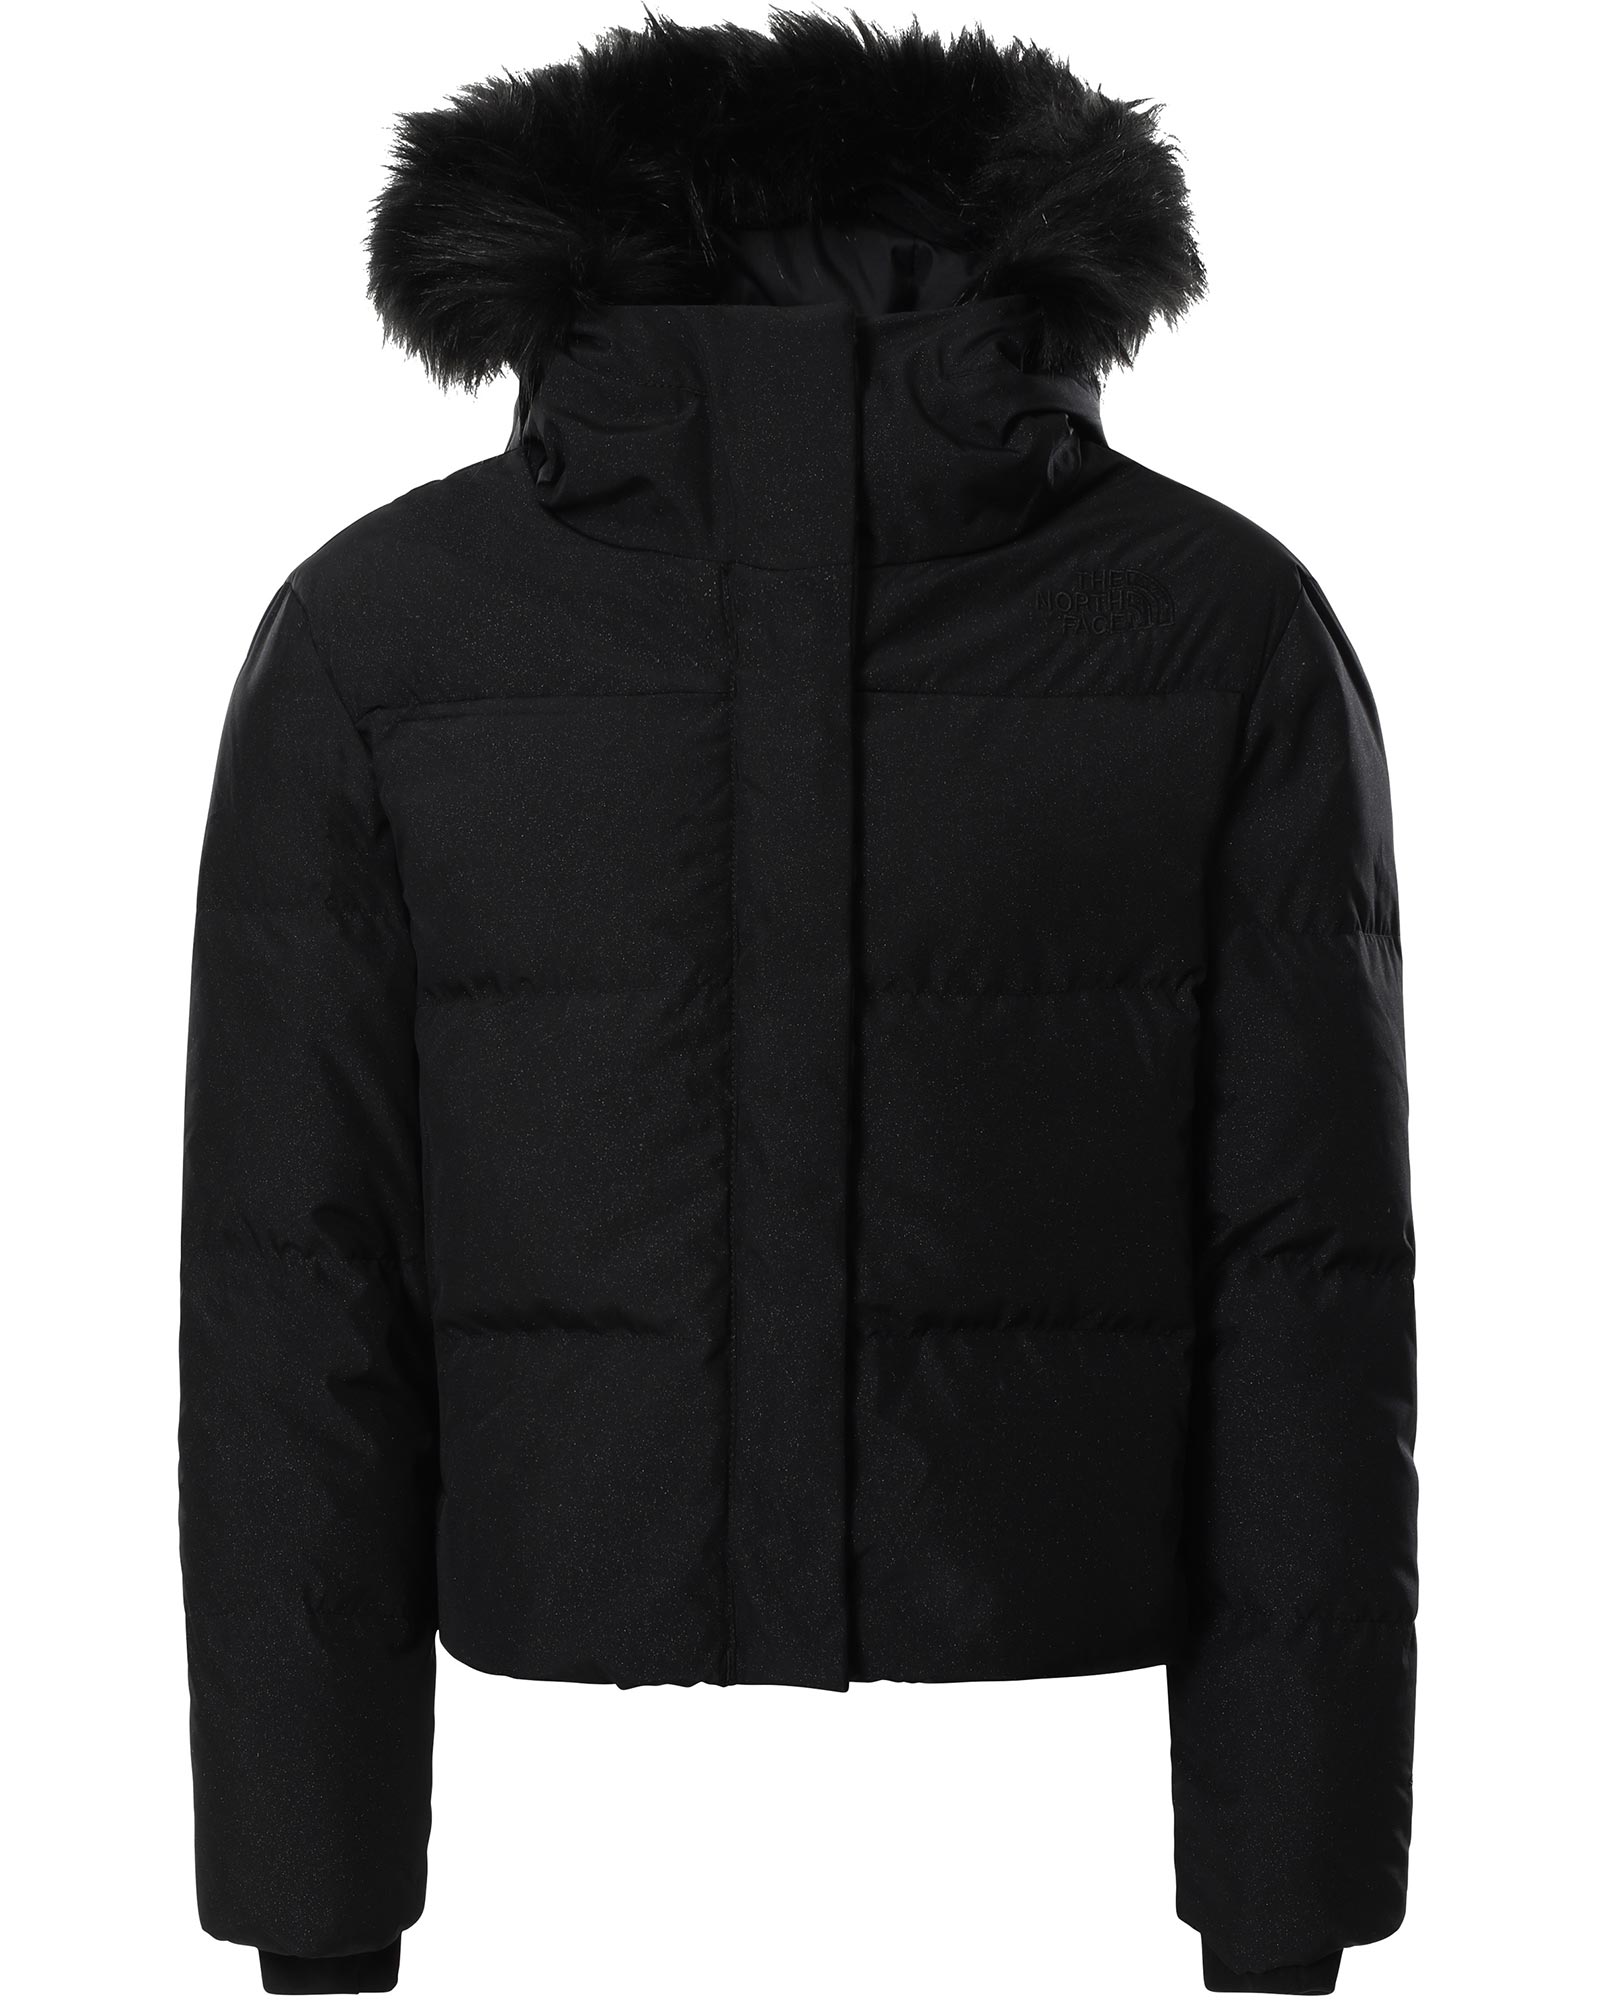 The North Face Dealio City Girls Jacket